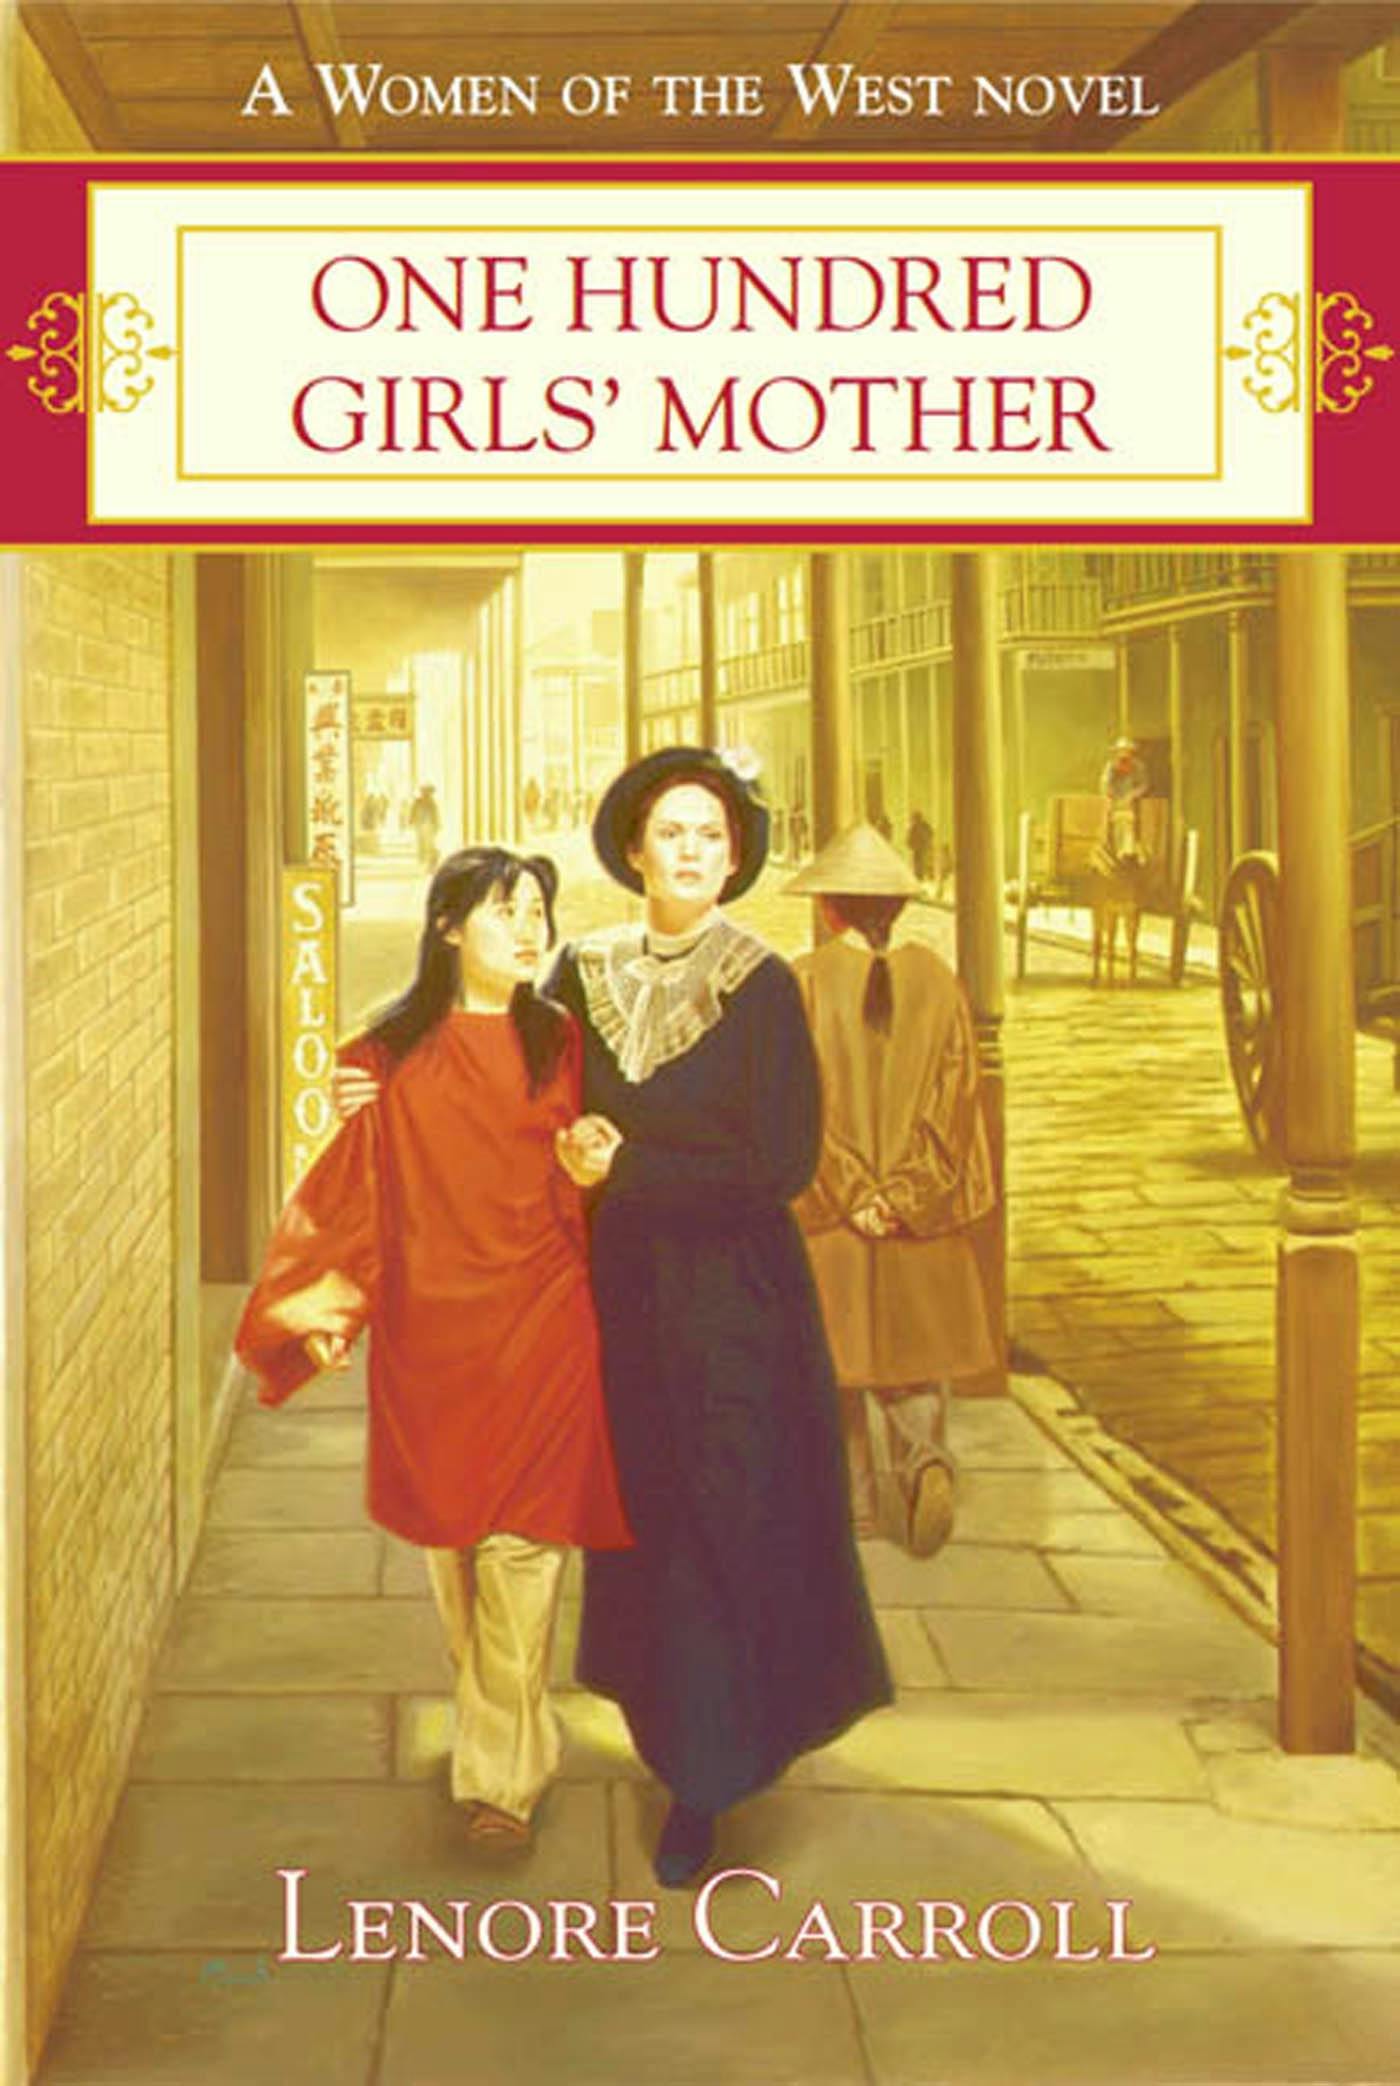 Cover for the book titled as: One Hundred Girls' Mother